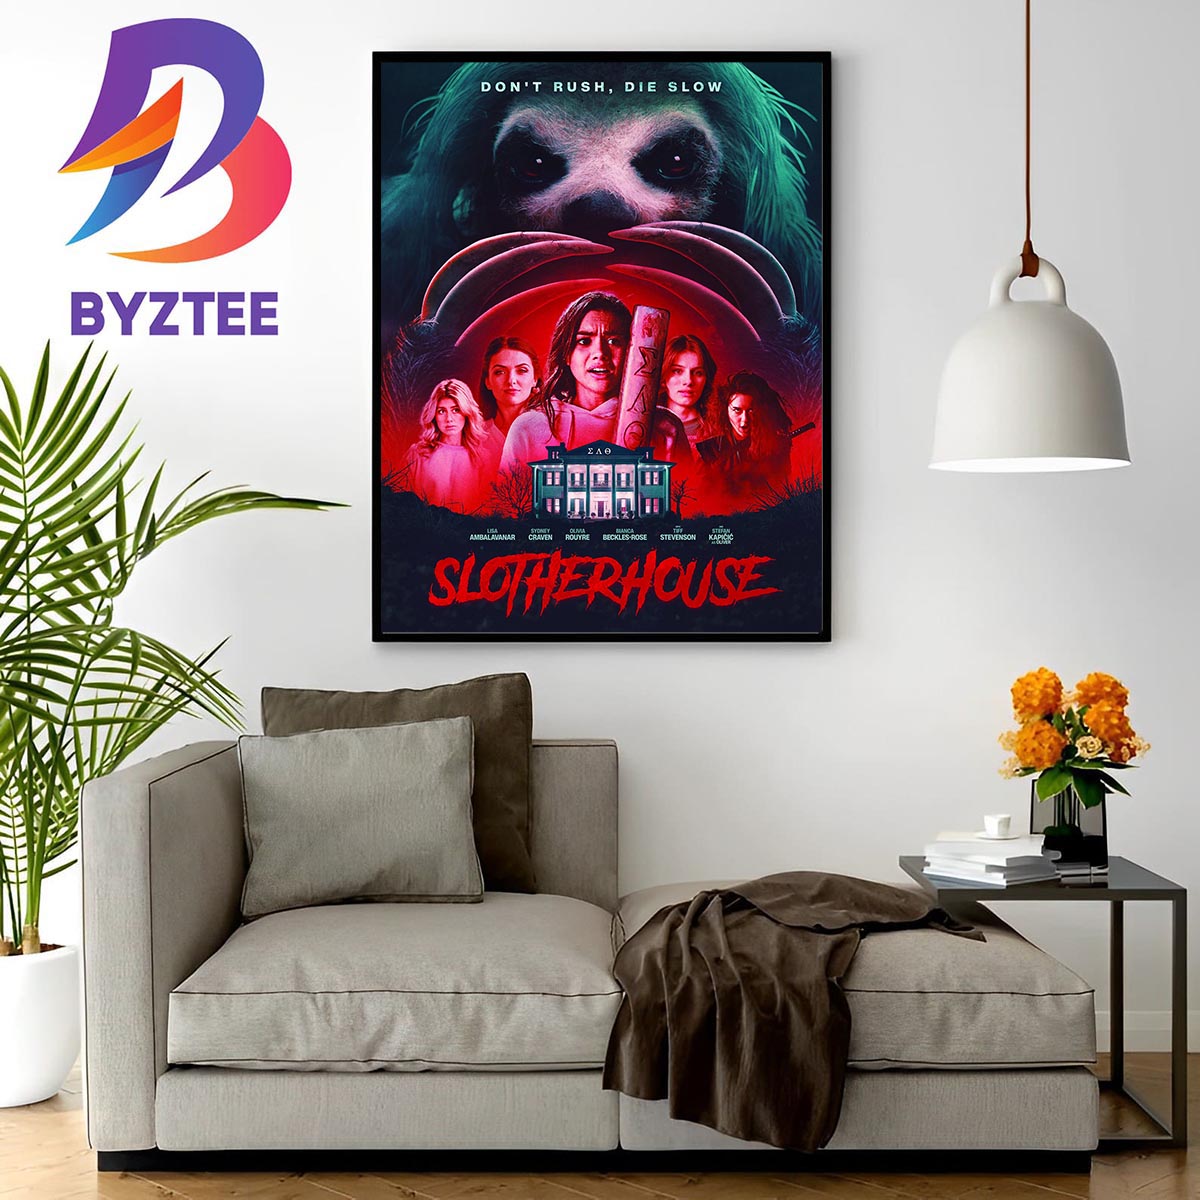 Slotherhouse New Poster Movie Wall Decor Poster Canvas - Byztee